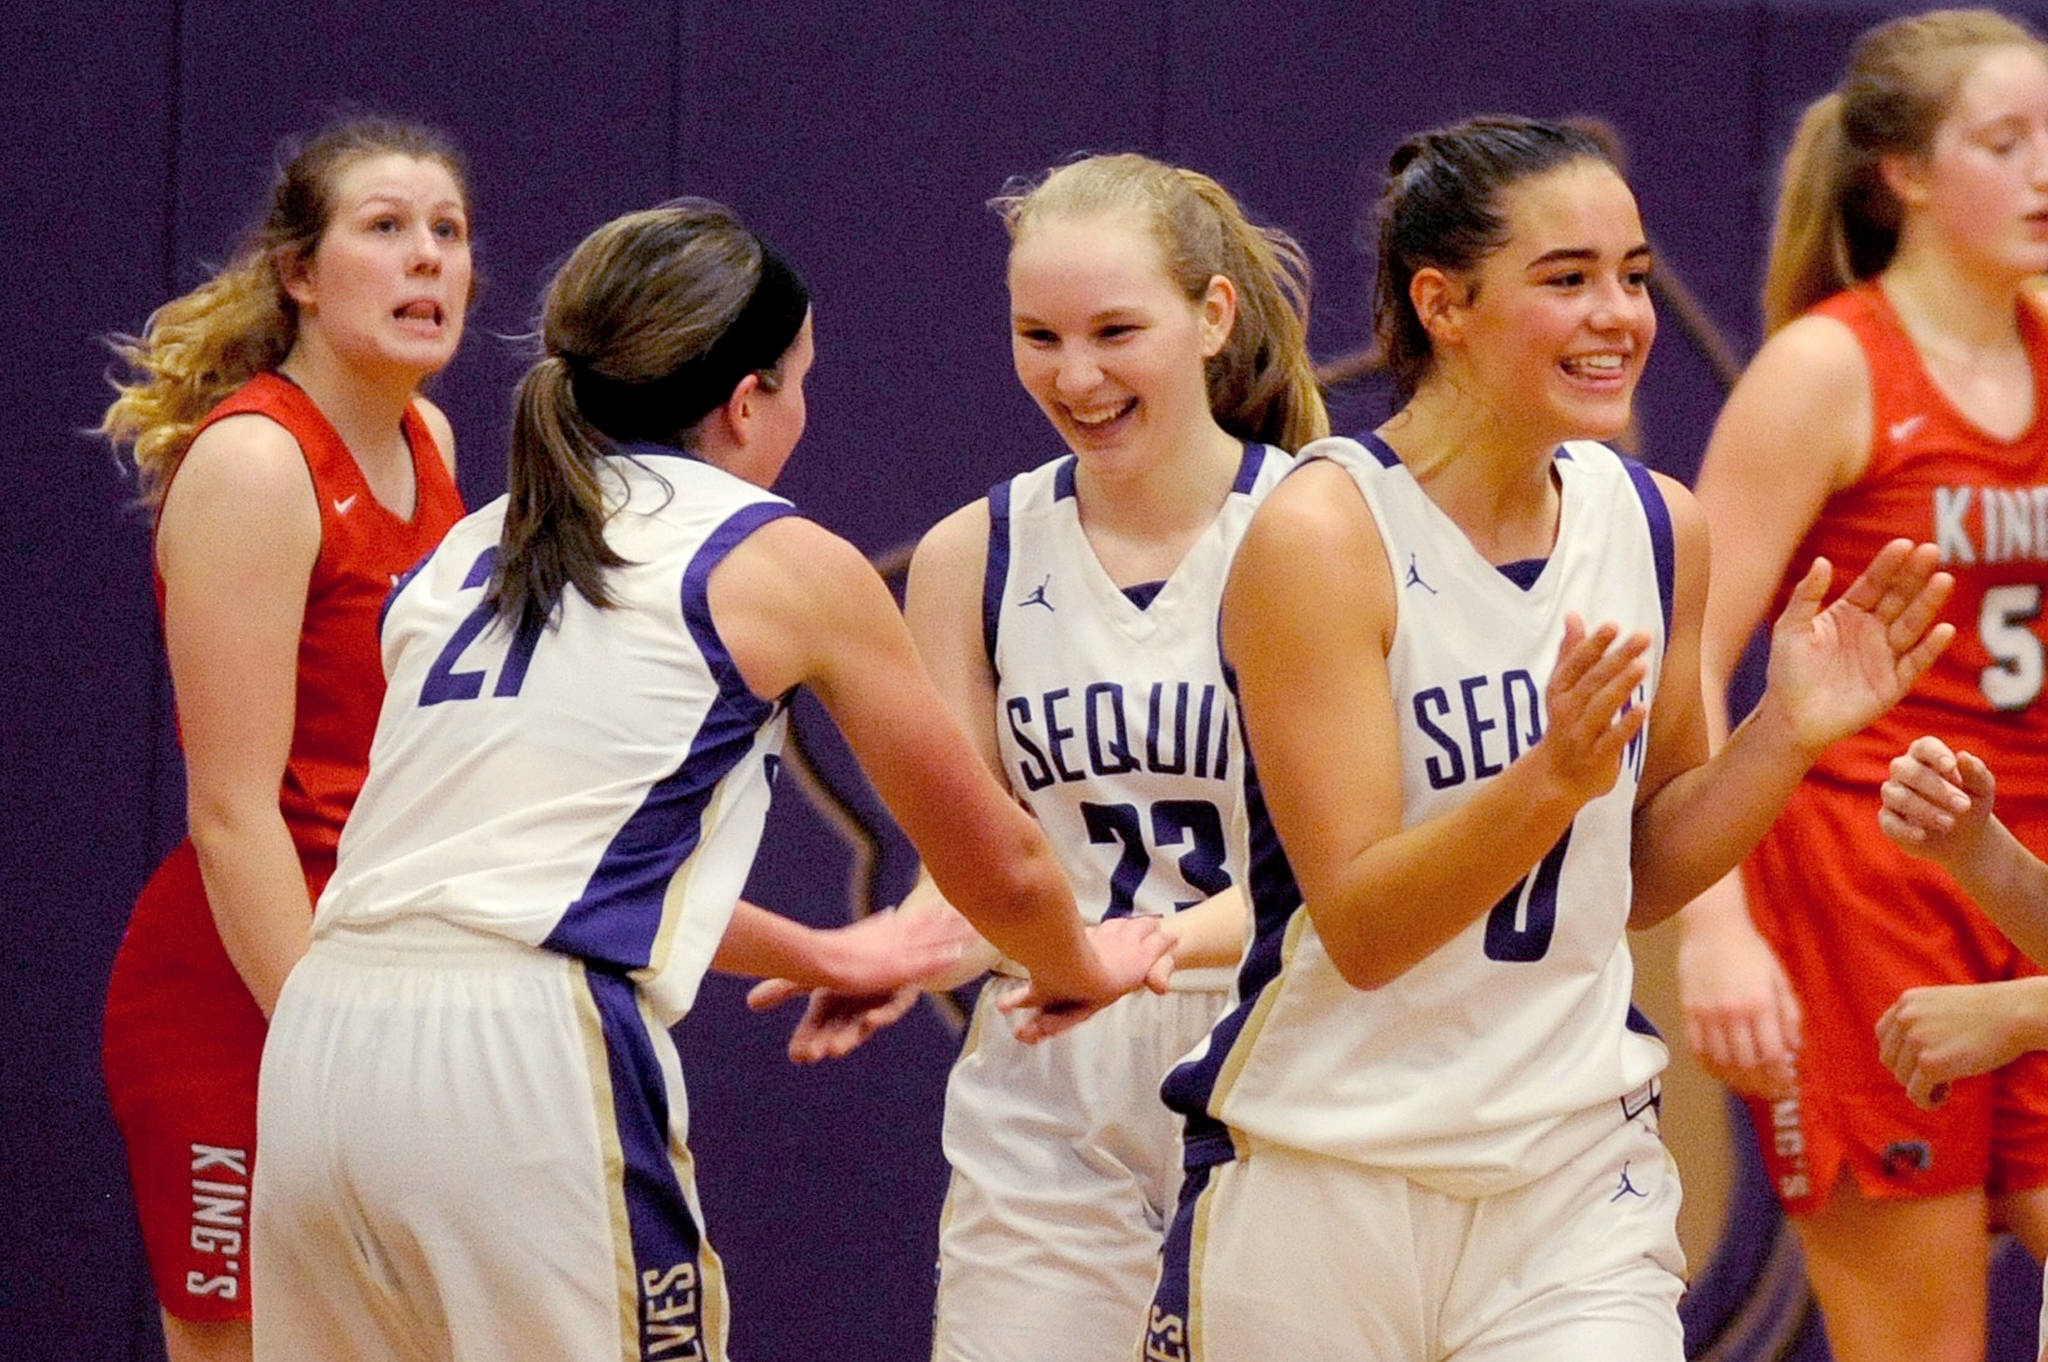 Kalli Wiker, Melissa Porter, and Hope Glasser (left to right) celebrate after the final buzzer of the Sequim Wolves’ 60-52 win over the Kings Knights on Jan. 29.